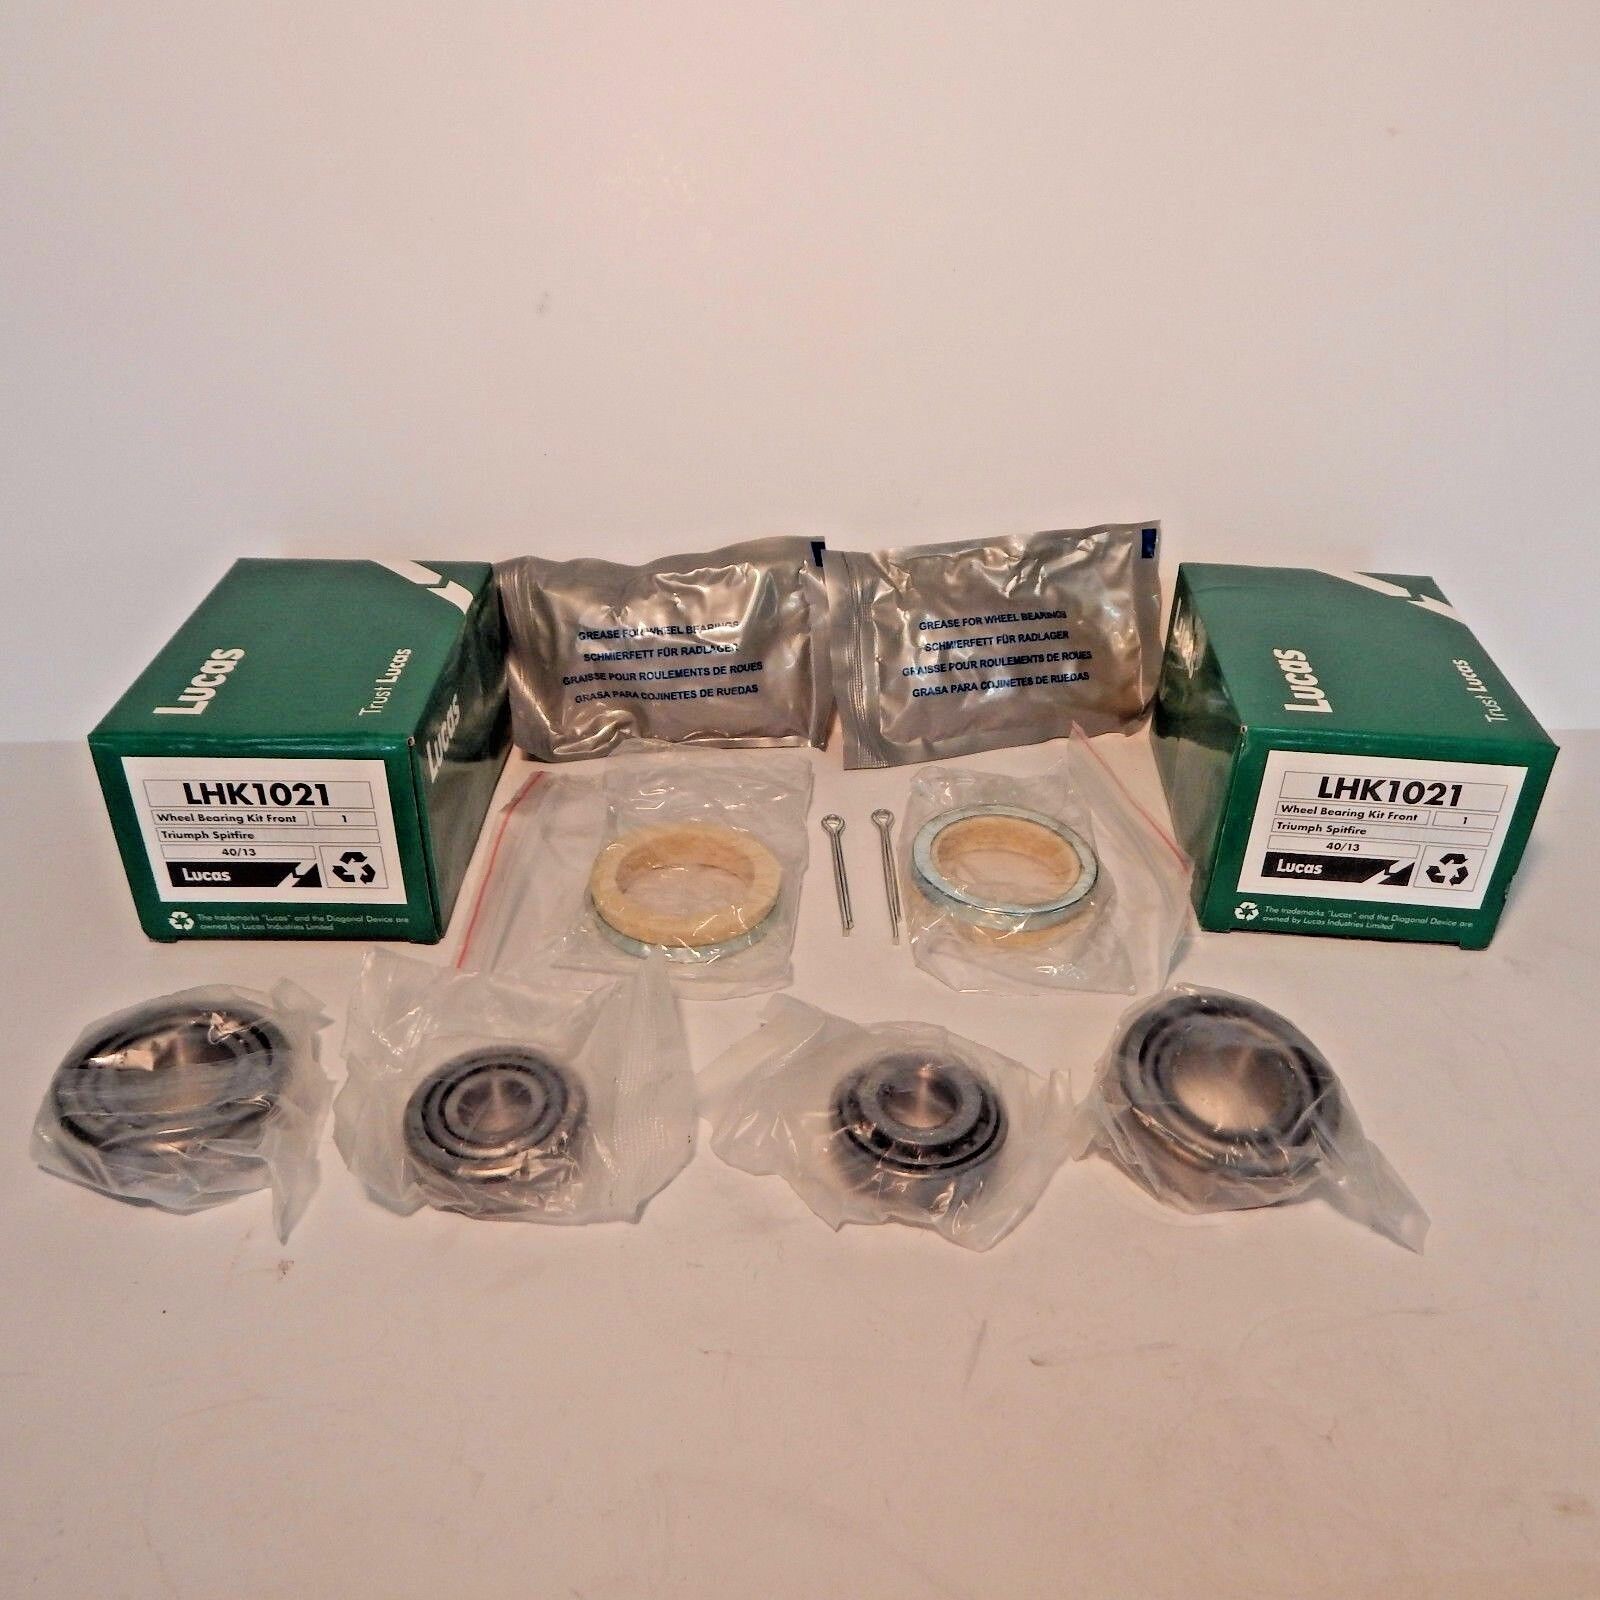 Pair of Lucas Front Wheel Bearing Kits for Triumph Spitfire 1962-80